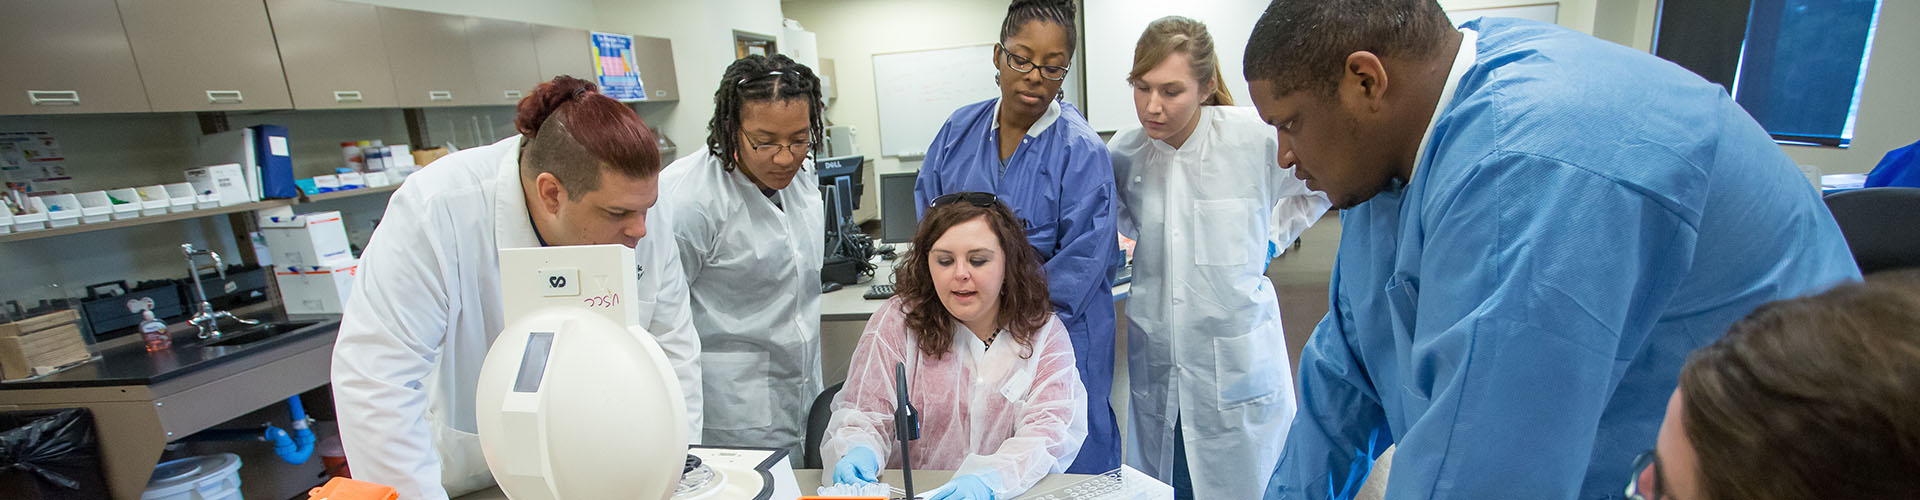 health sciences students in a lab